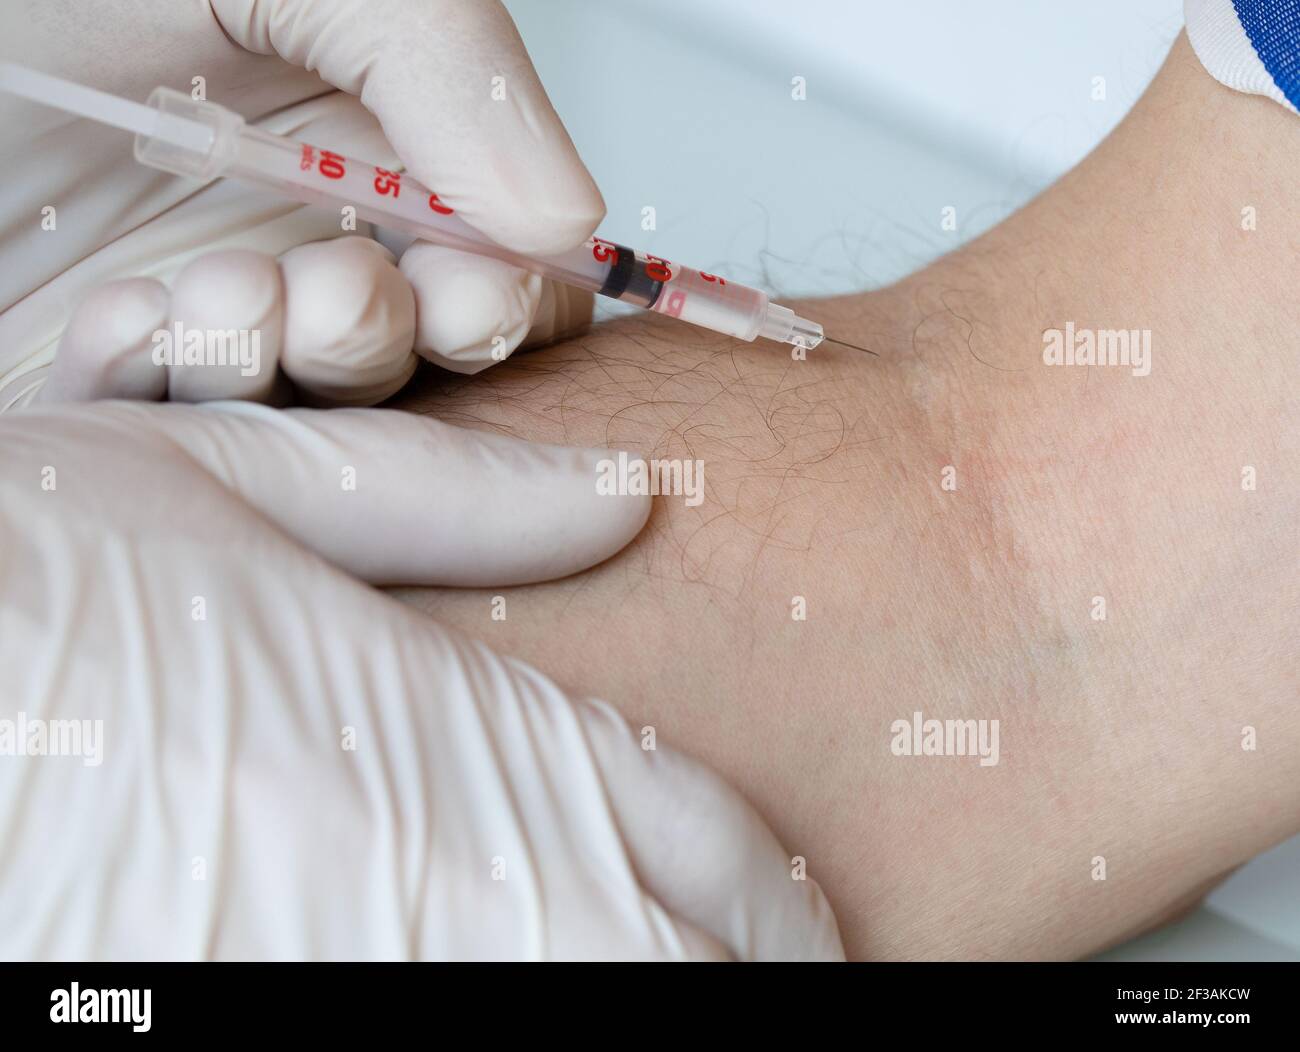 Medical assistant is about to administrate medication in the arm of a man. Closeup Stock Photo